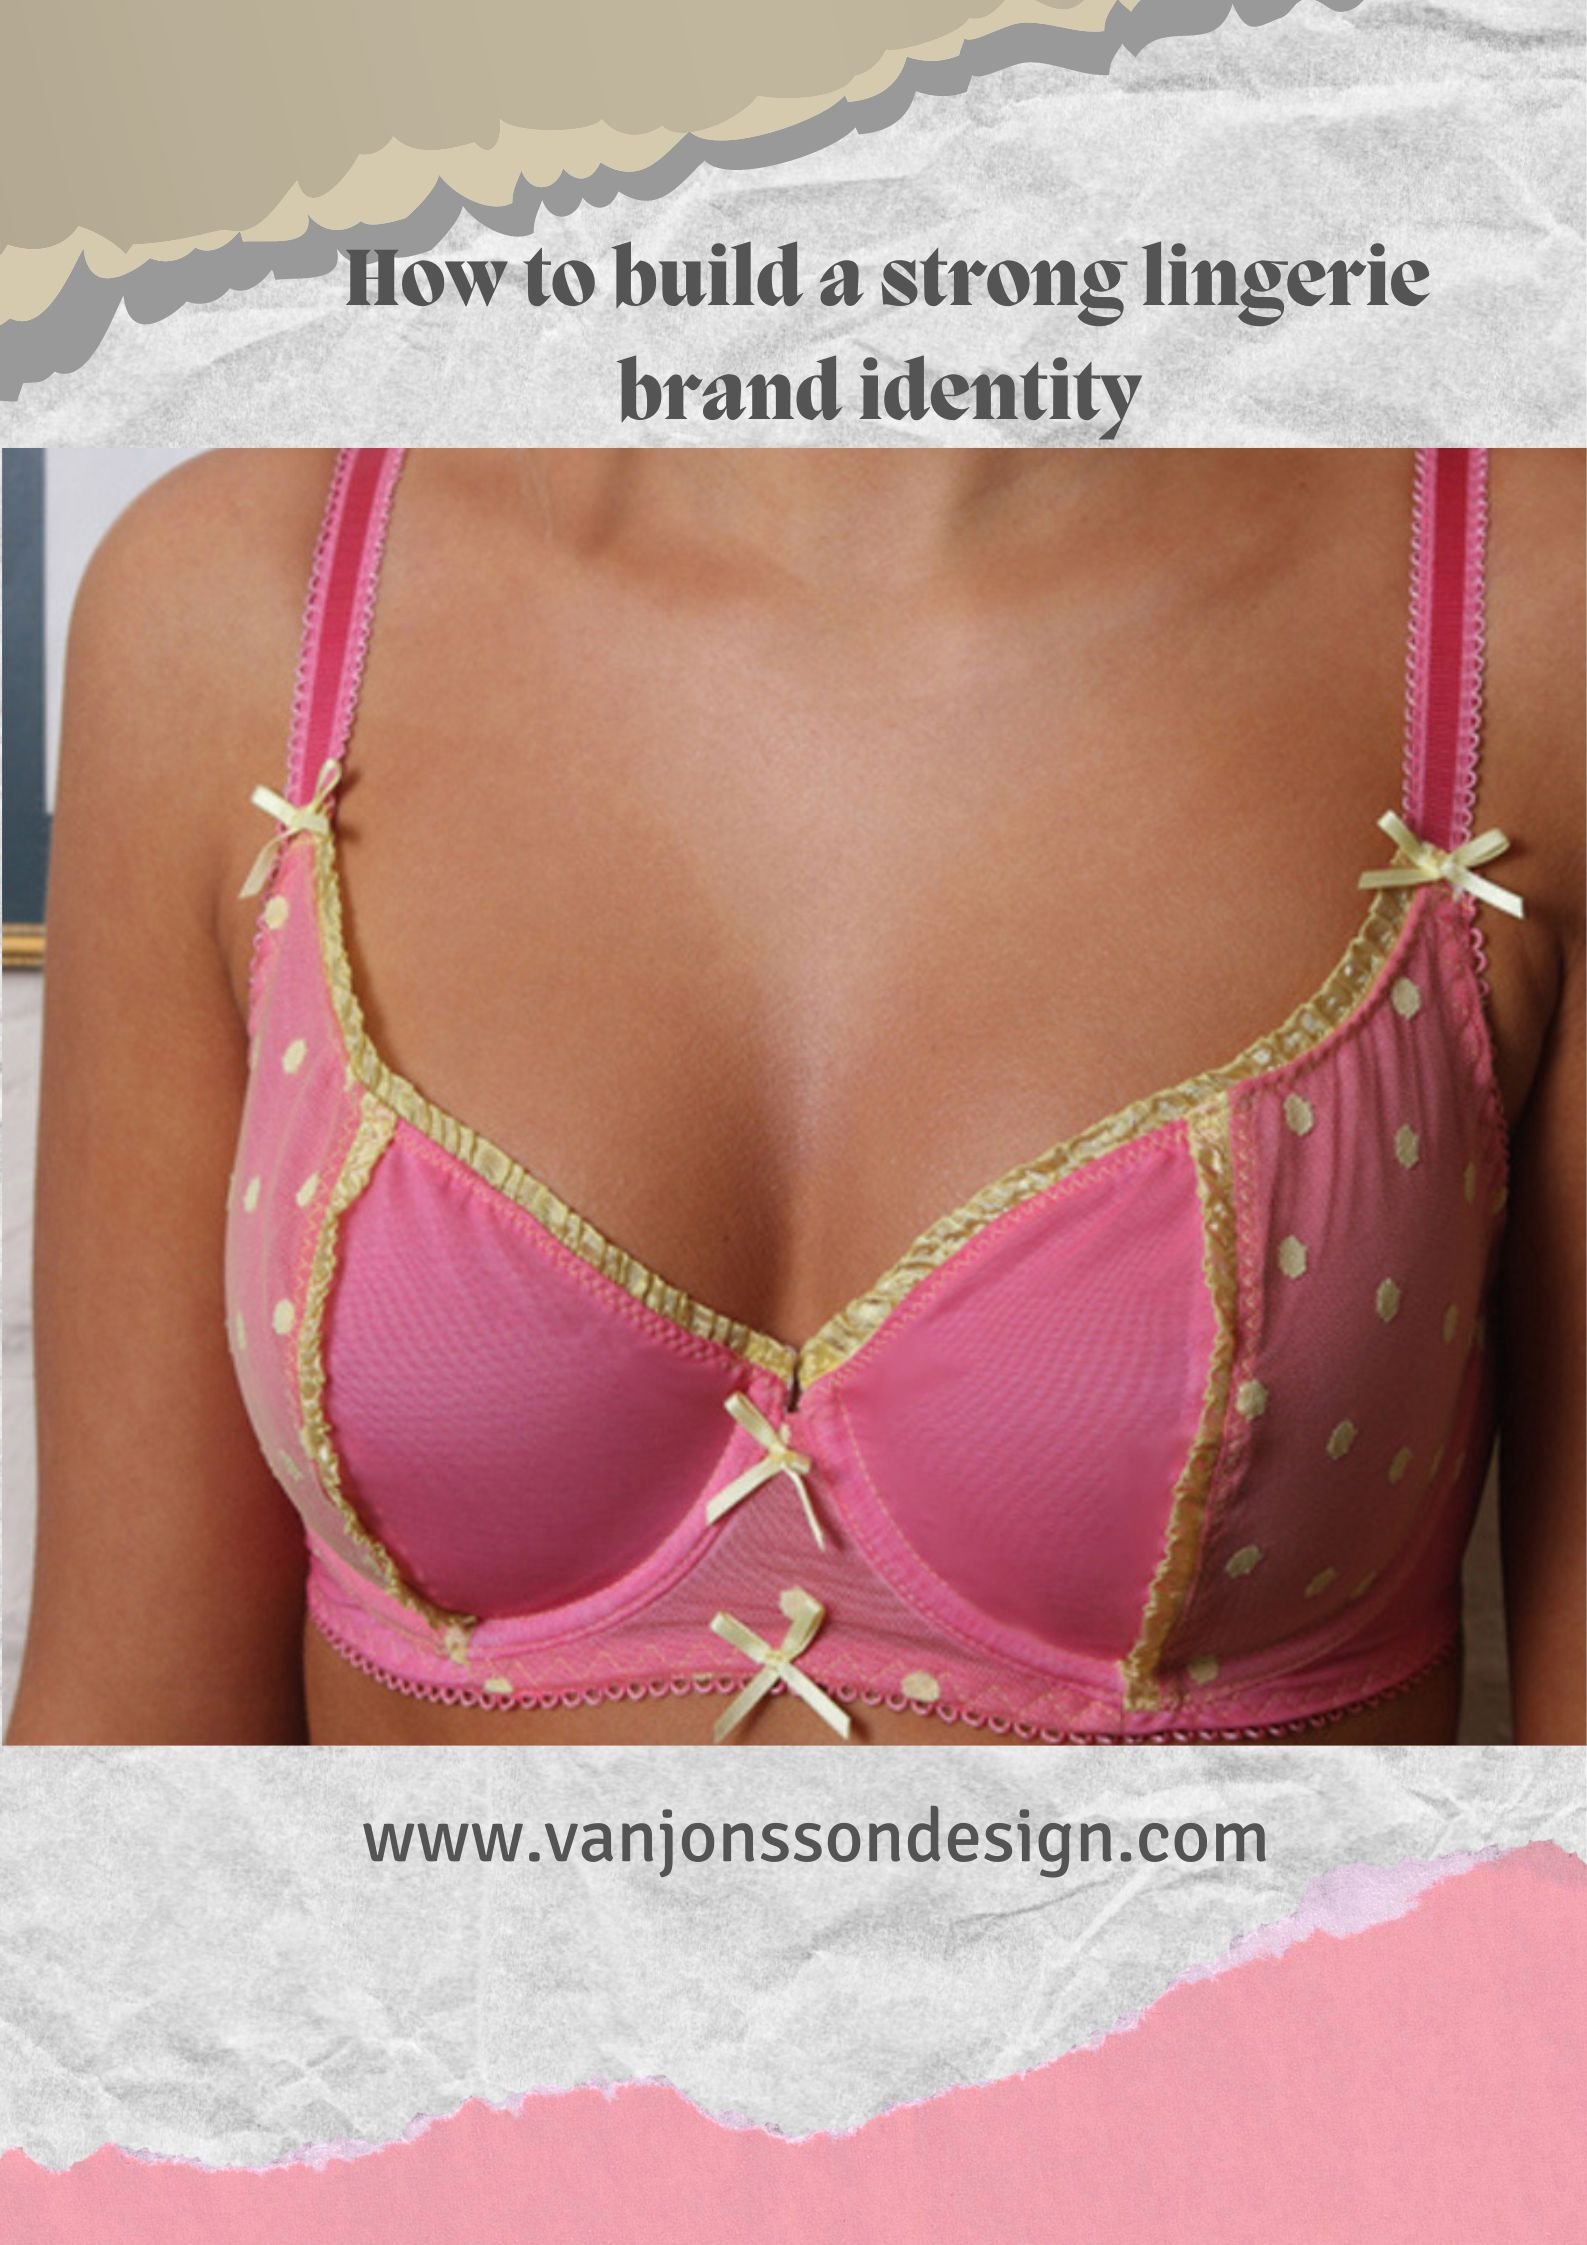 How to build a strong brand identity with your lingerie brand